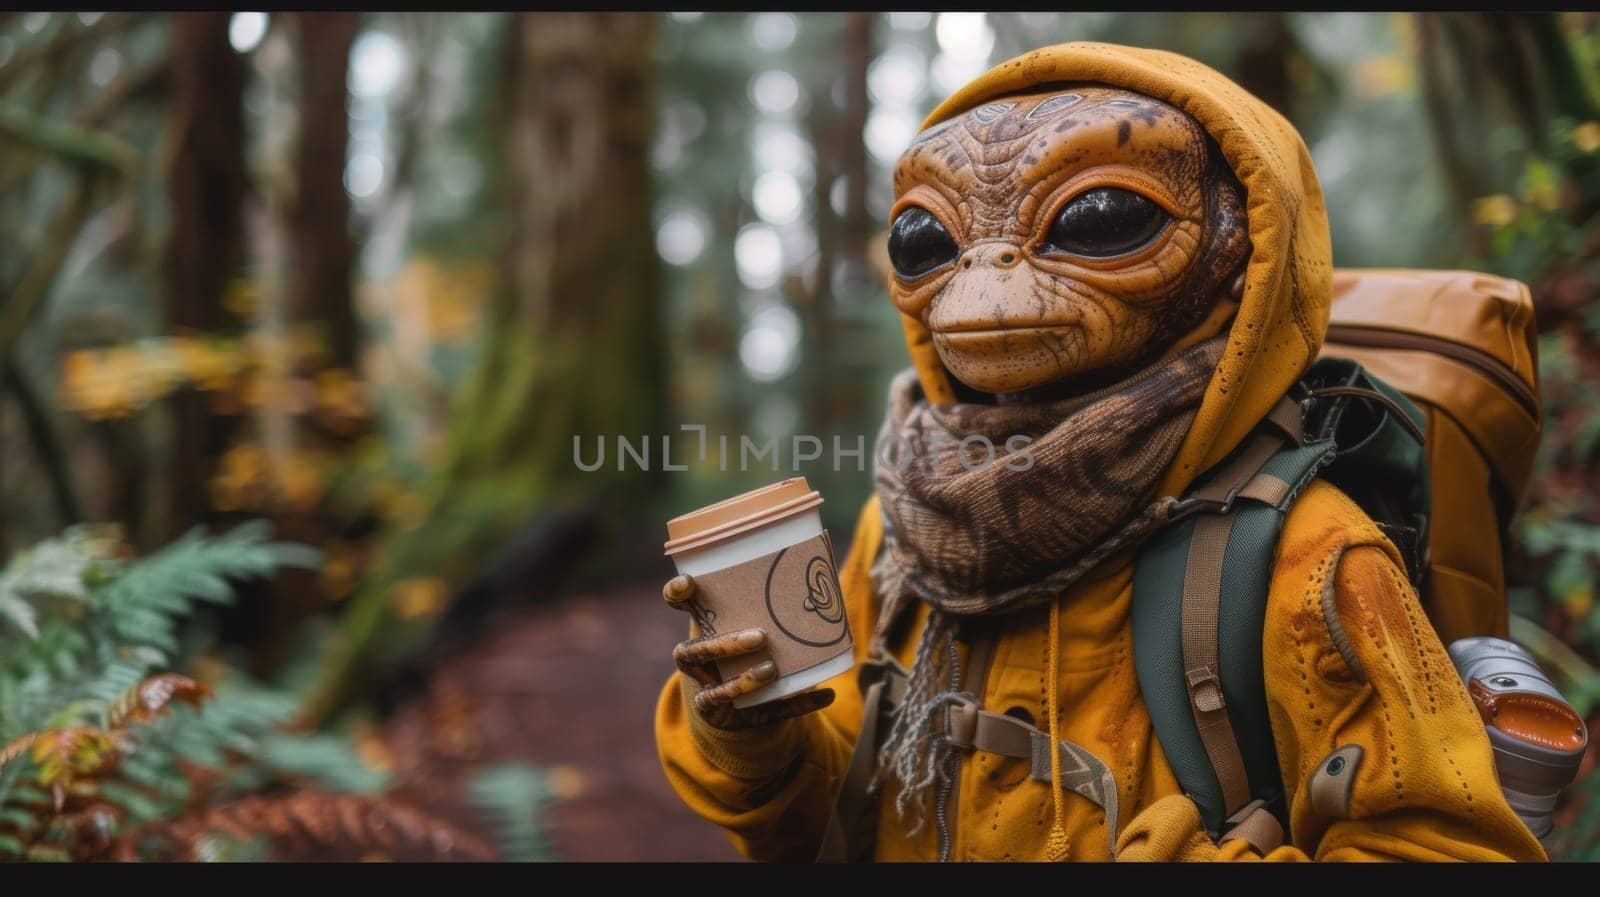 A person in a yellow jacket holding coffee and wearing an alien mask